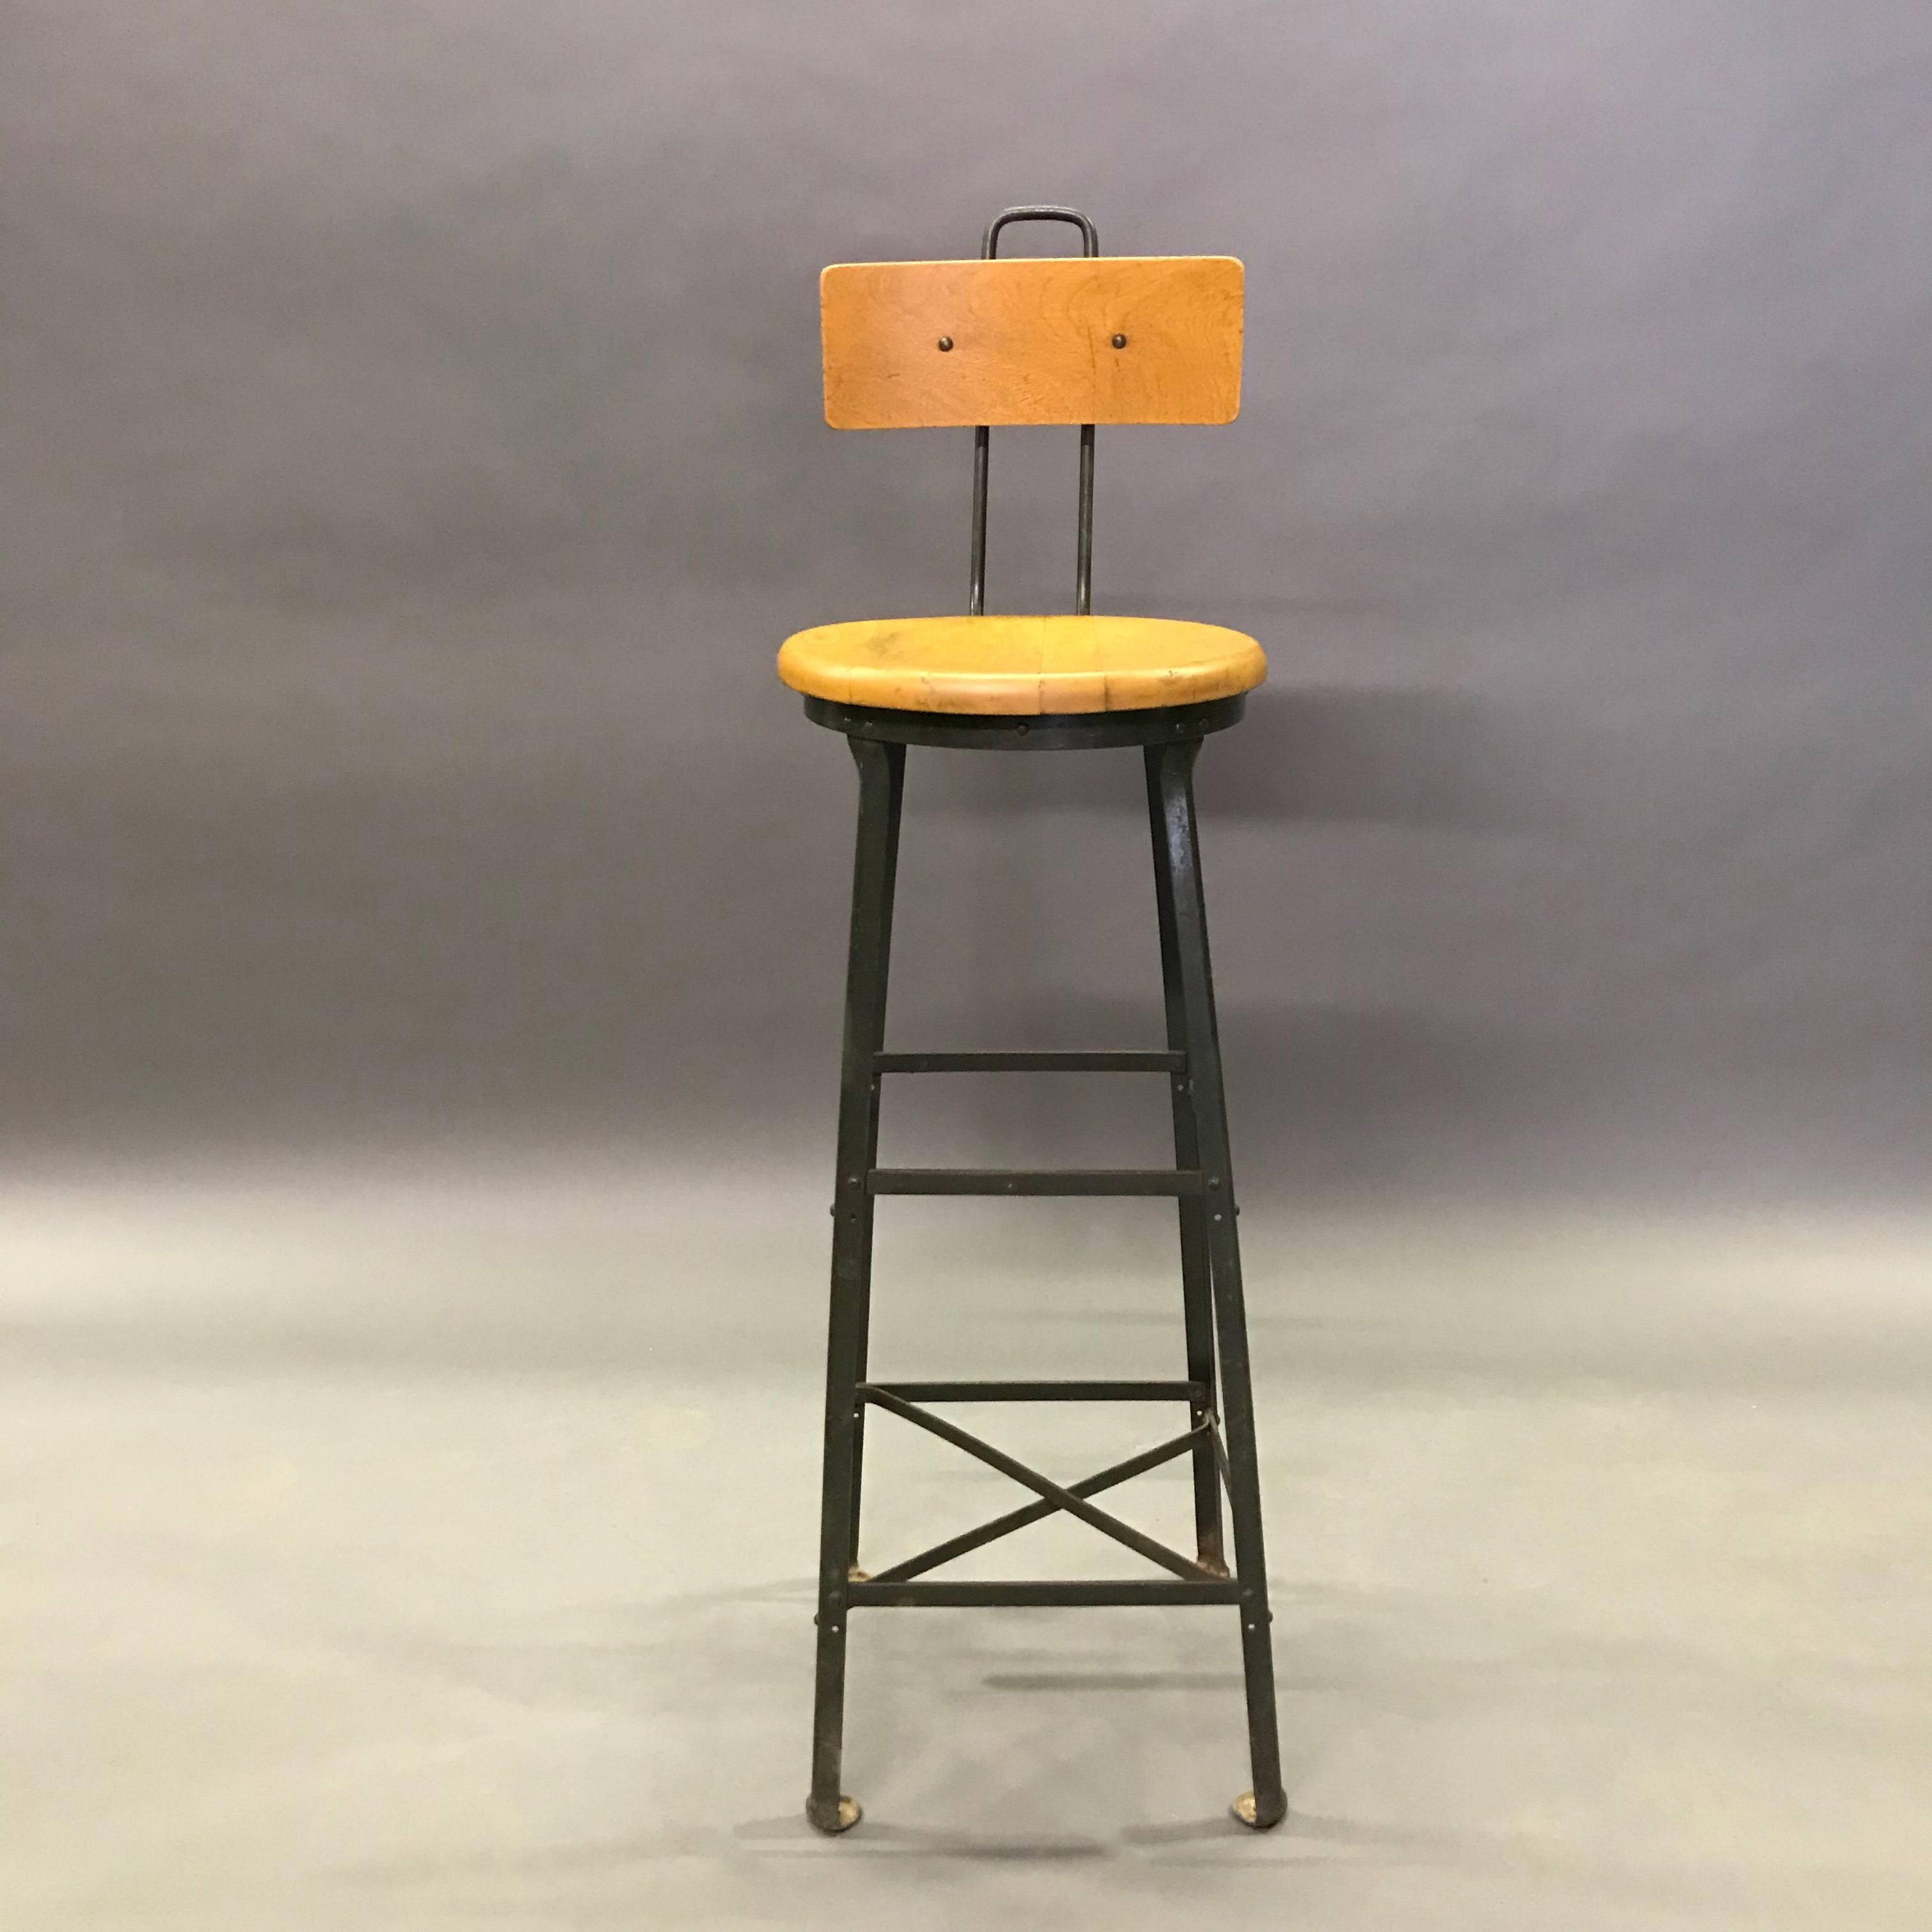 Tall, industrial, railway train station, switchboard operator stool with maple seat and back on a painted steel, angle iron frame.